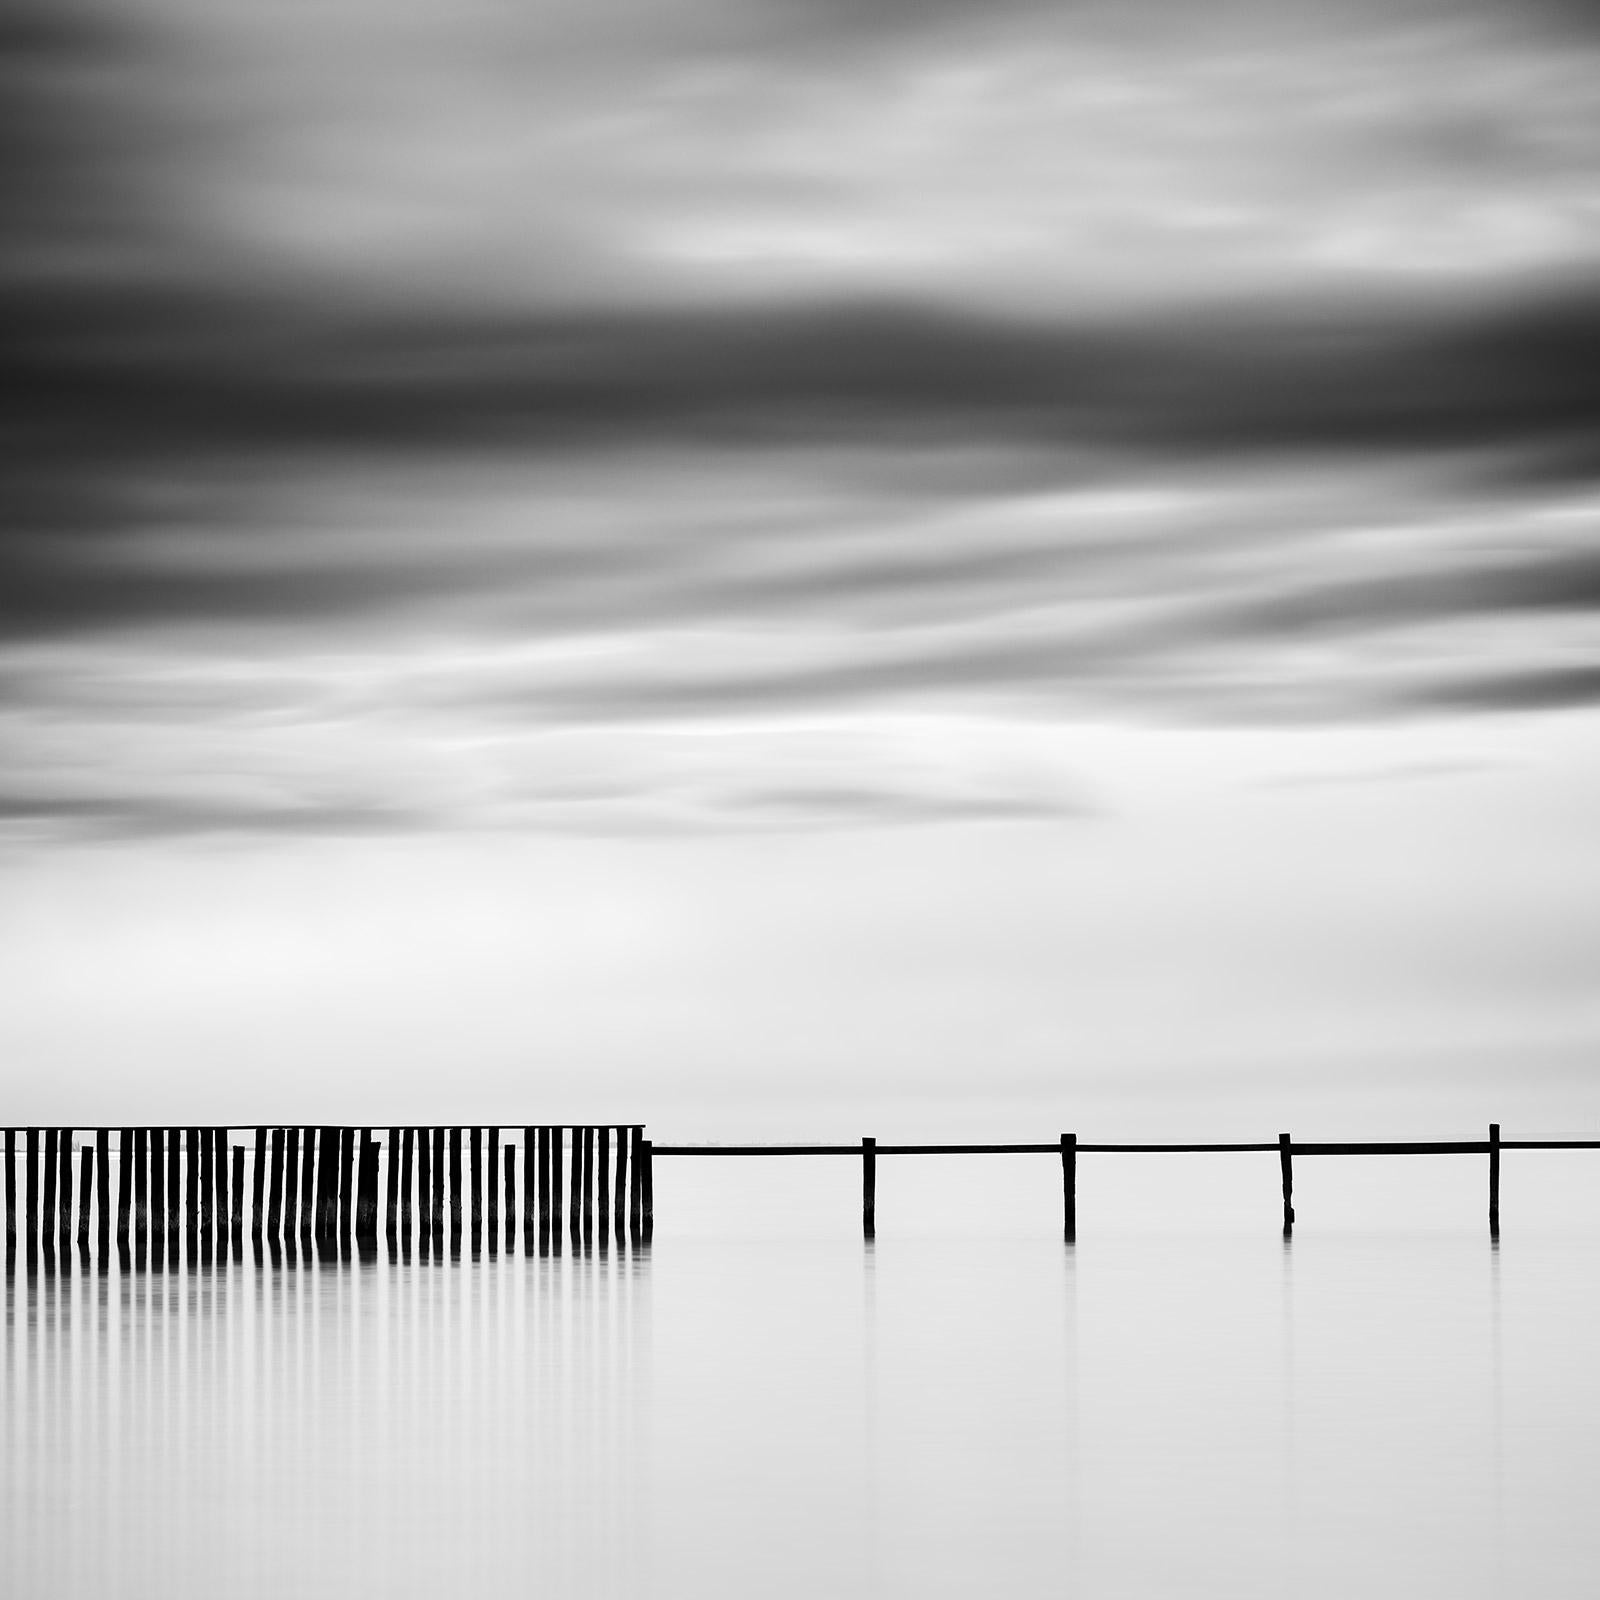 Gerald Berghammer Landscape Photograph - Swimming Area, cloudy, lake, black and white long exposure landscape photography